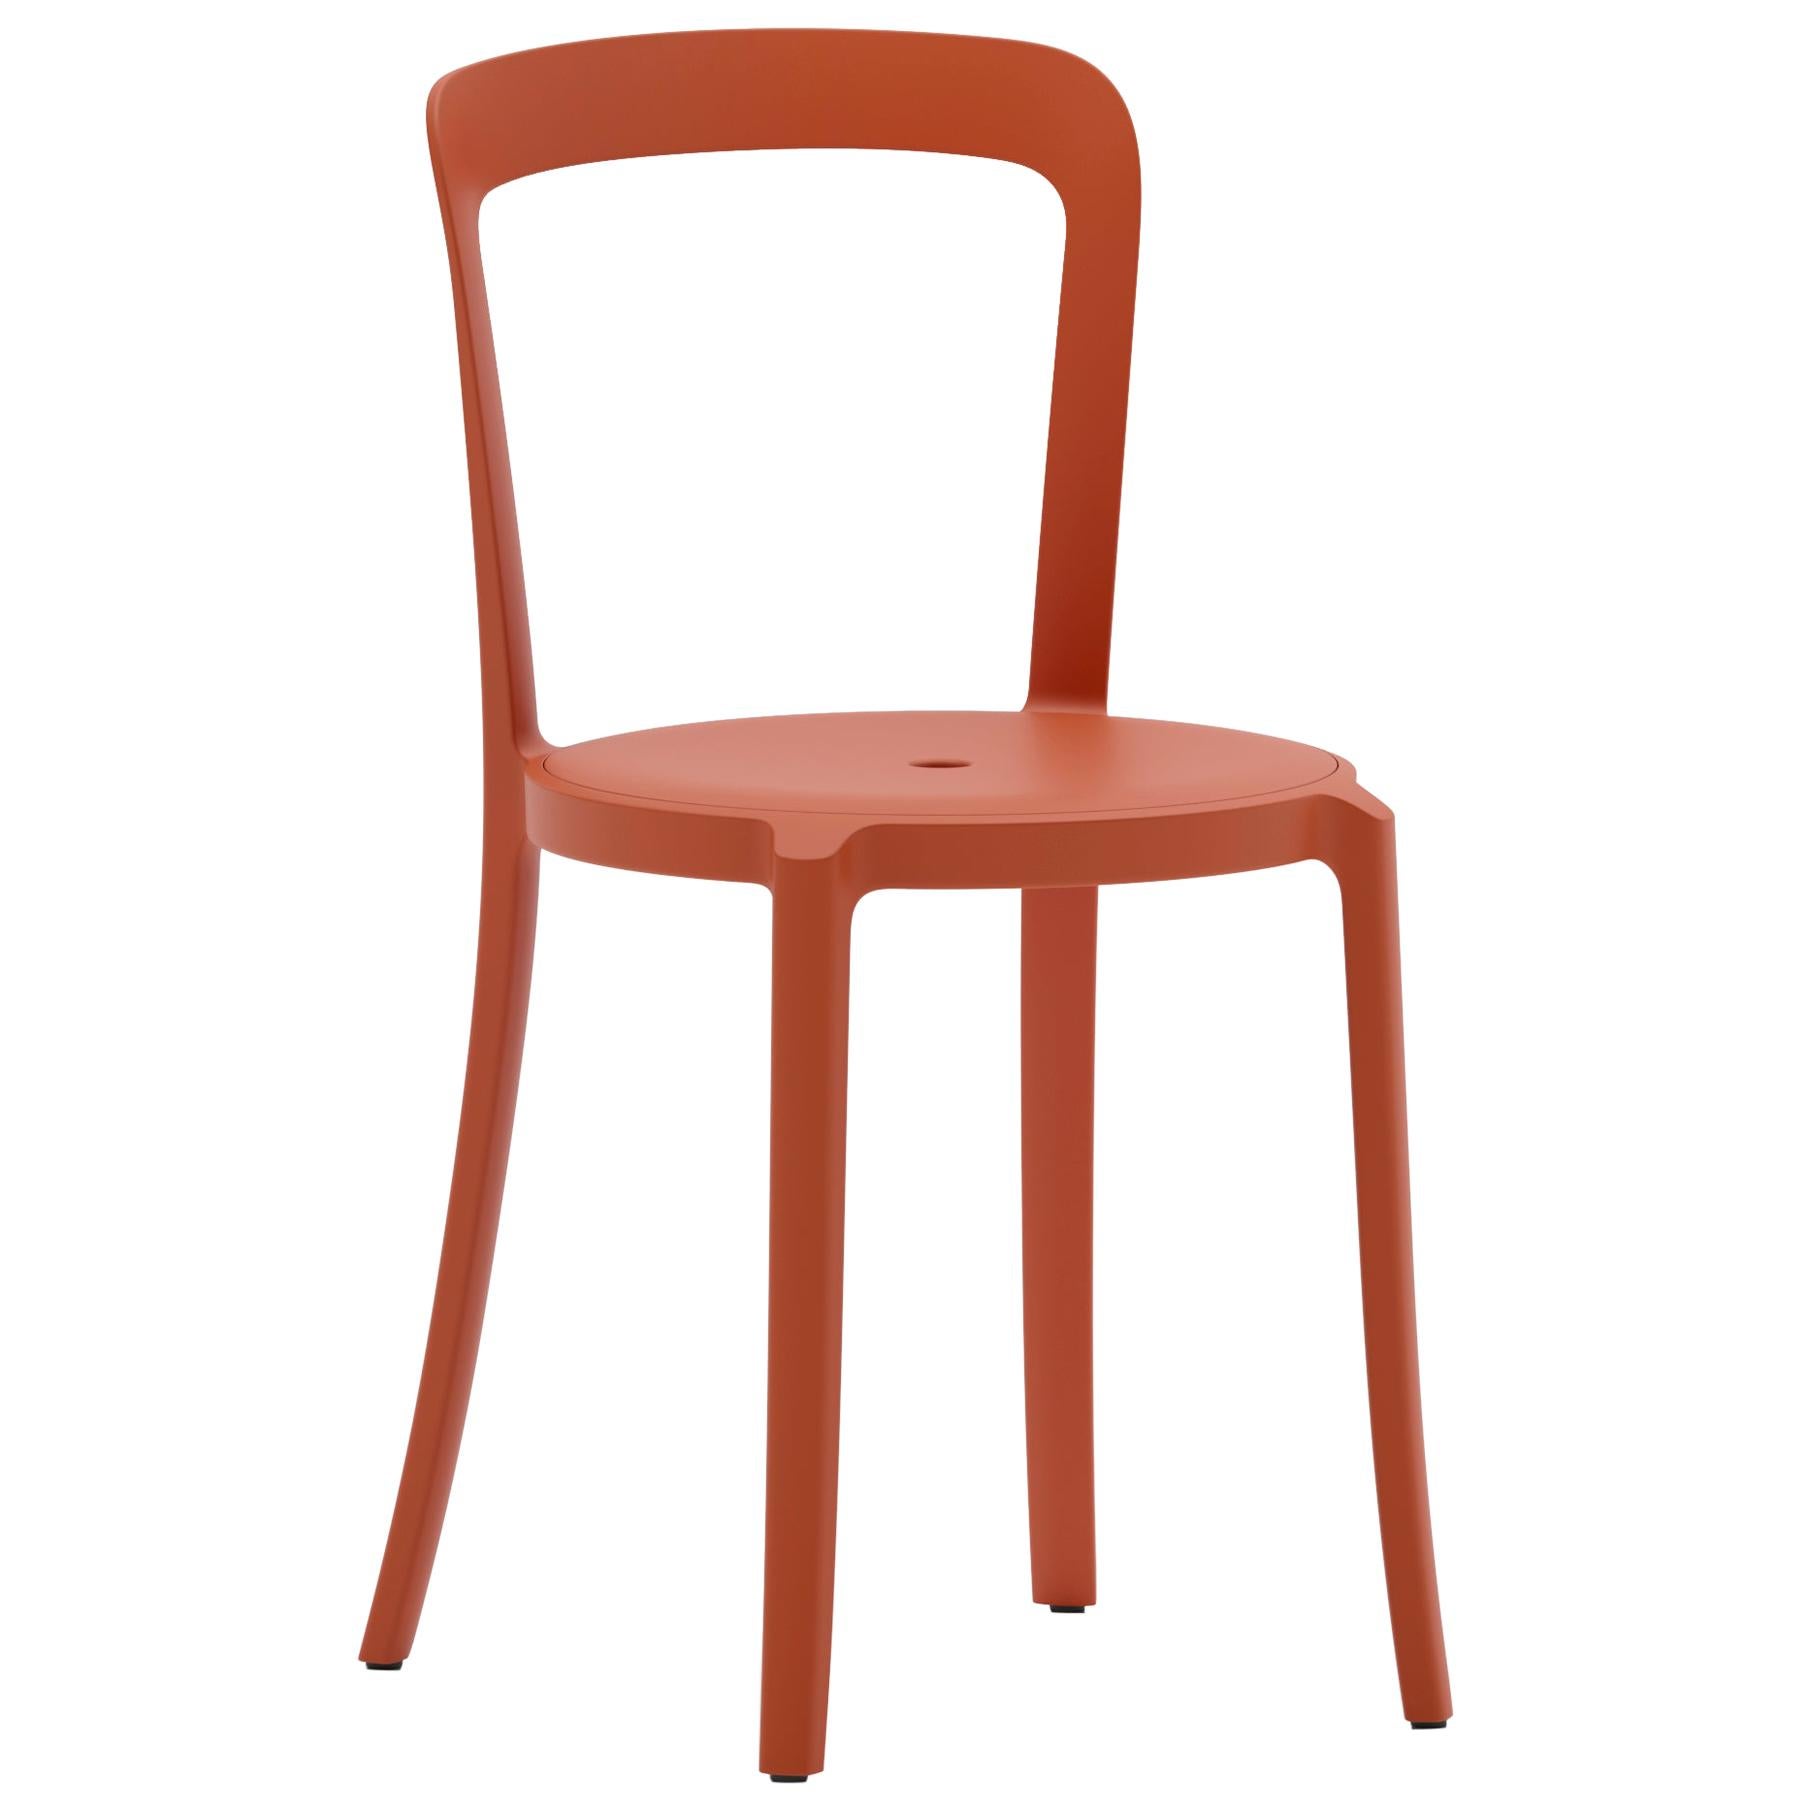 Emeco On & On Stacking Chair in Orange Plastic by Barber & Osgerby